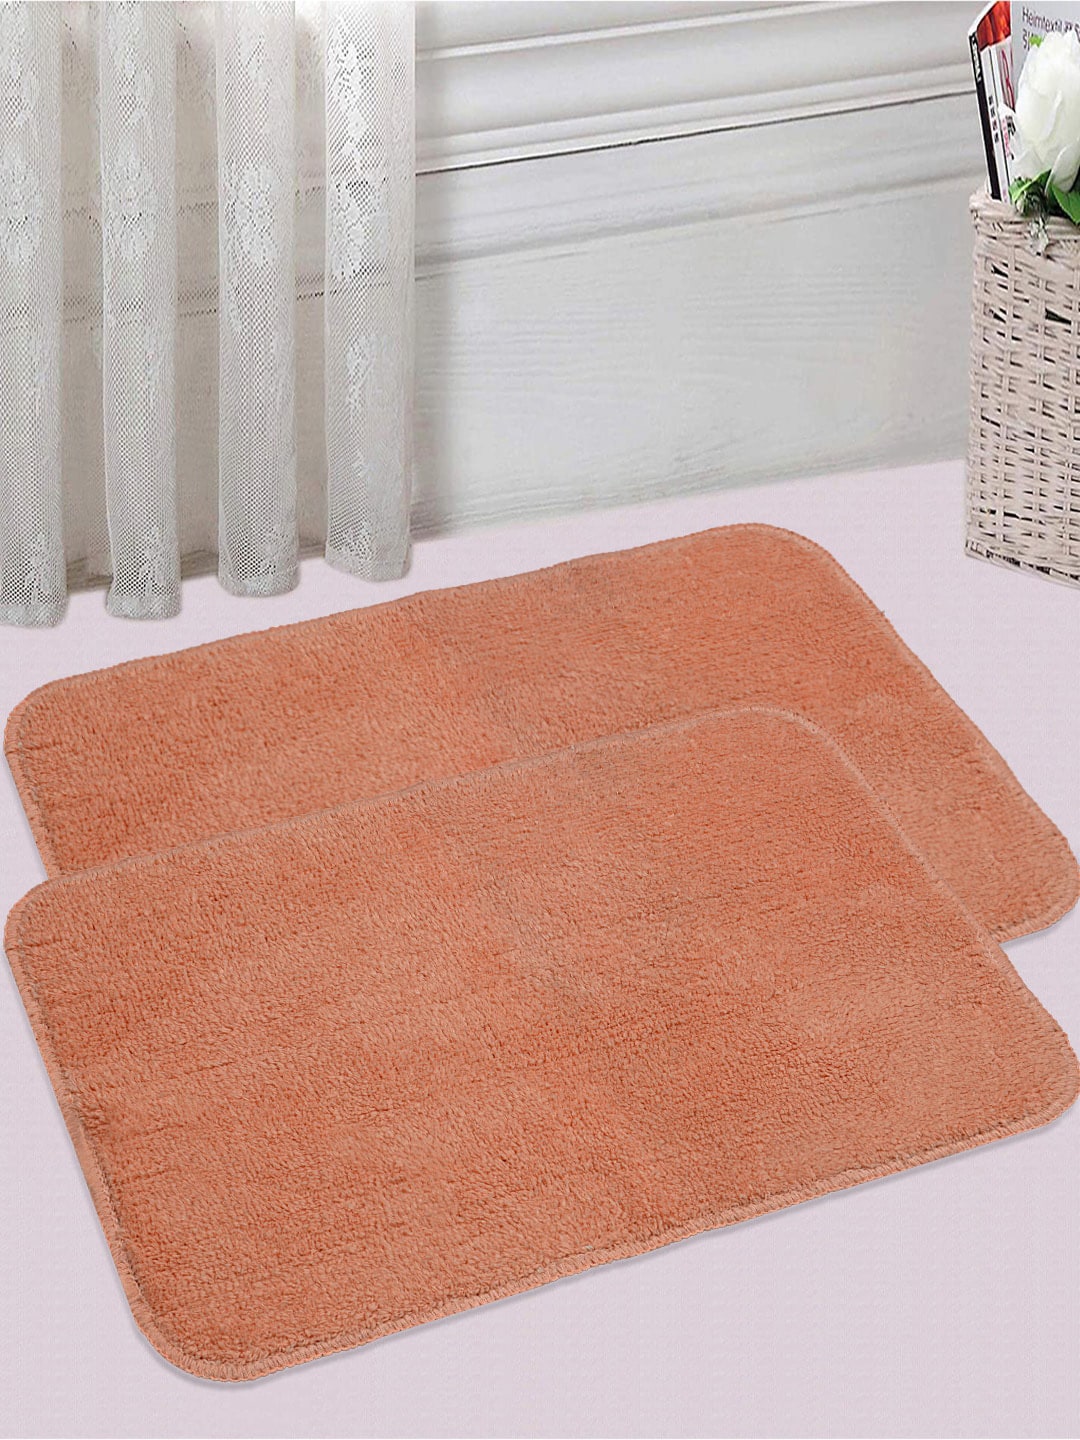 Saral Home Set of 2 Rust Orange 1200 GSM Solid Cotton Bath Rugs Price in India